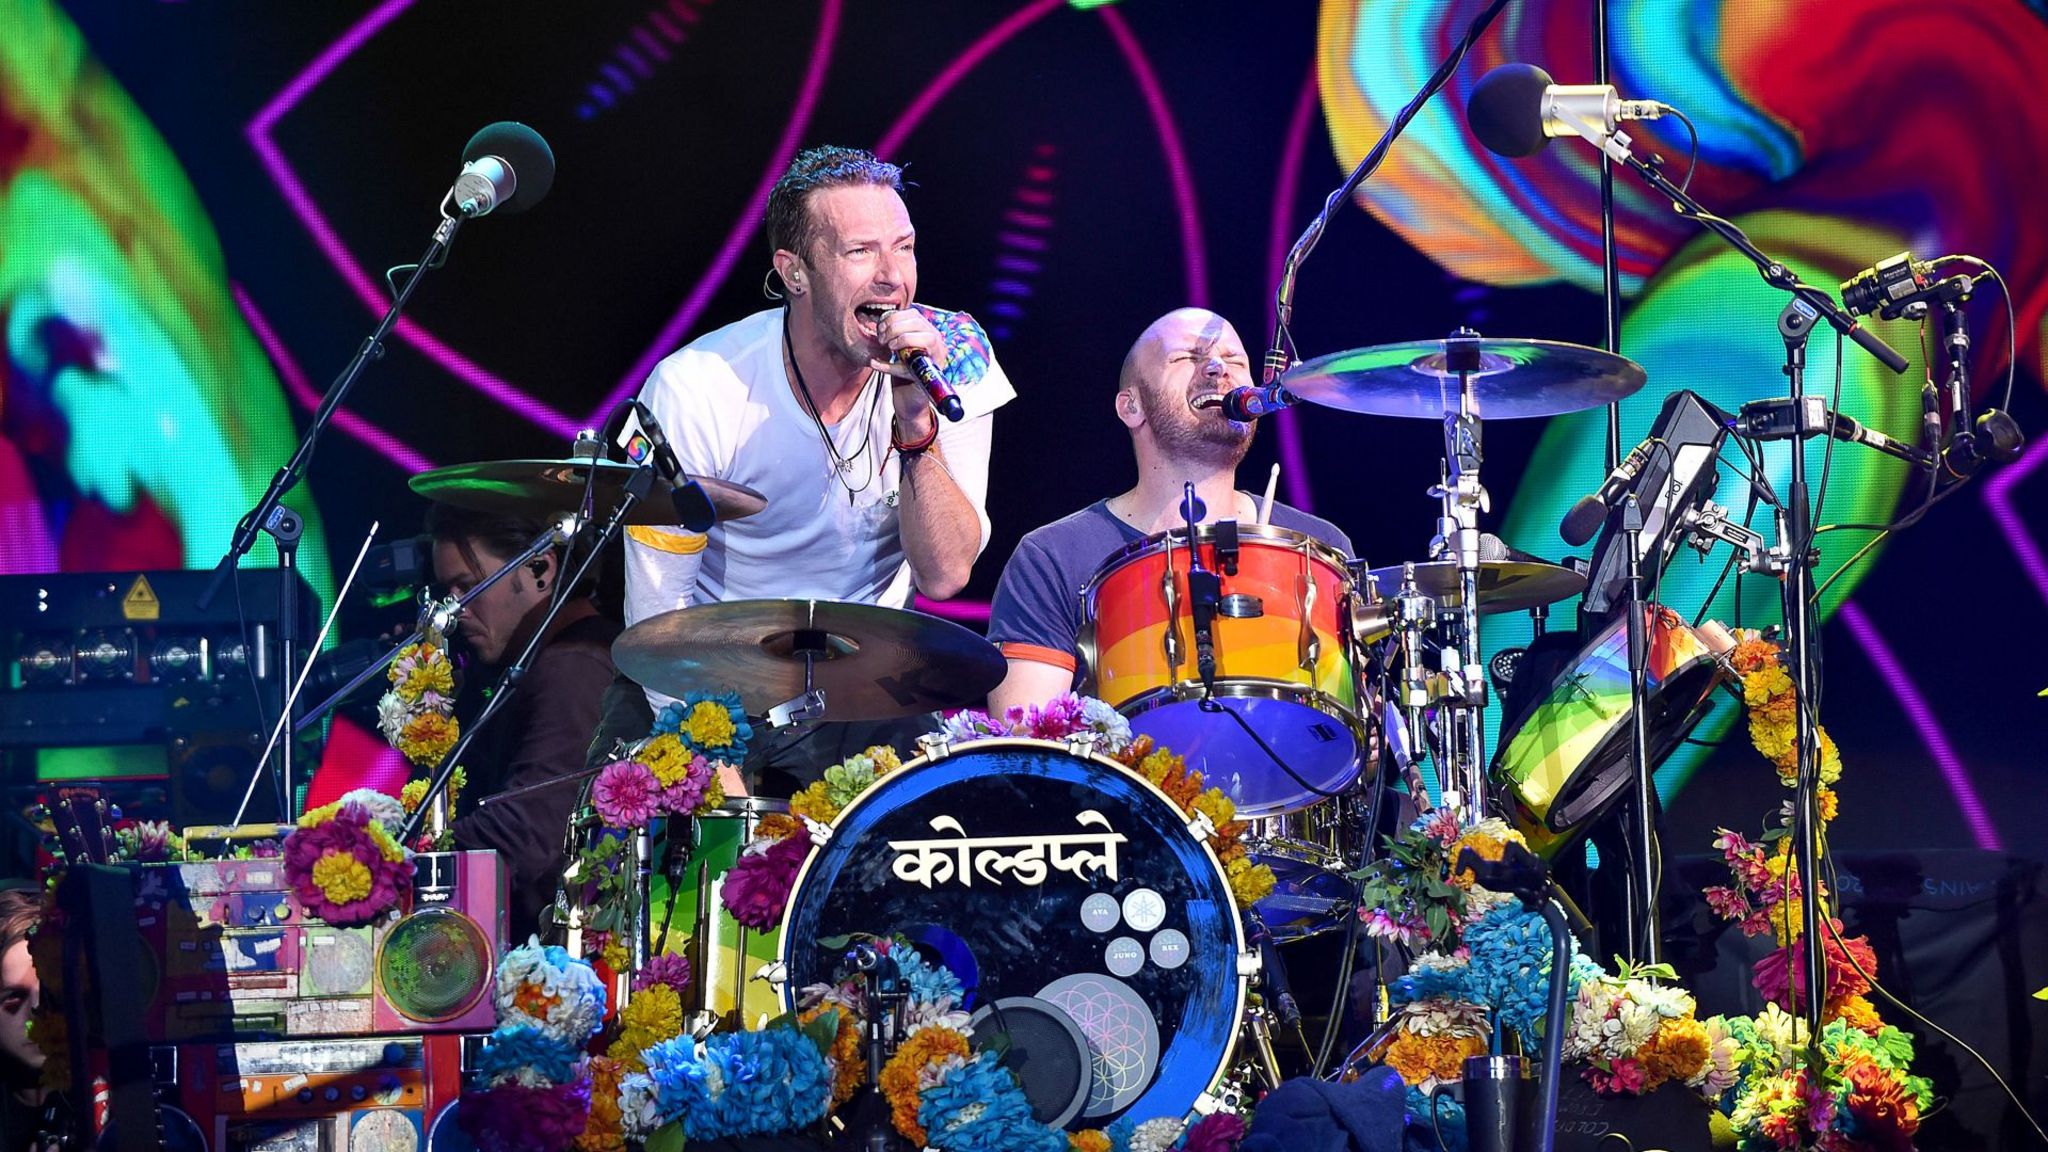 Coldplay performing on stage